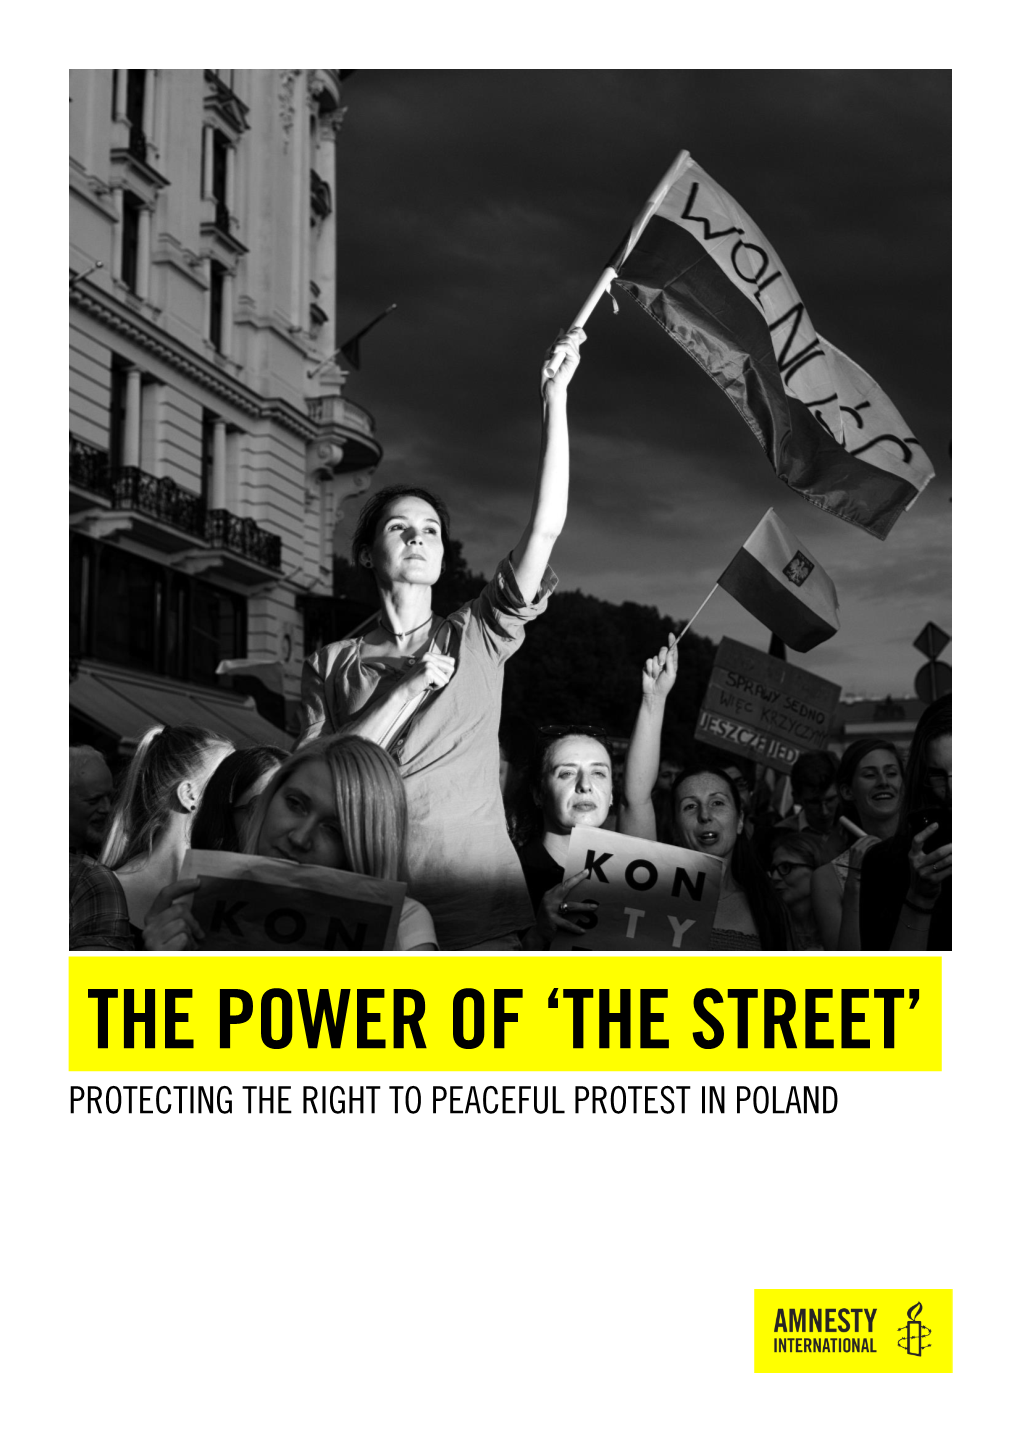 The Street’ Protecting the Right to Peaceful Protest in Poland